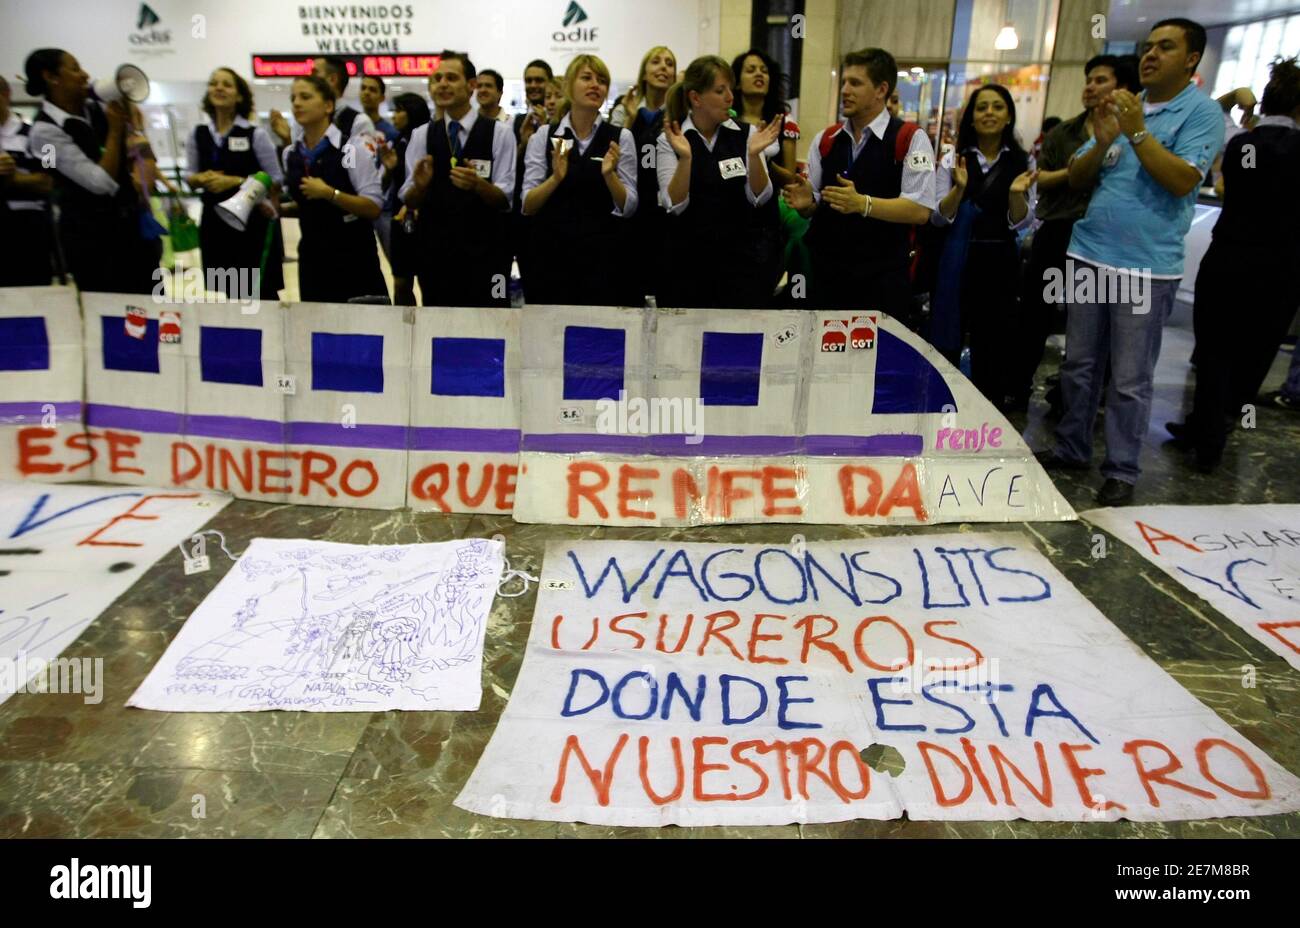 Workers of Wagon-Lits in the high-speed railway AVE of the Madrid-Barcelona-Madrid itinerary continue their strike in Barcelona Sants railway station June 13, 2008, demanding salary and labour improvements.  REUTERS/Gustau Nacarino  (SPAIN) Stock Photo